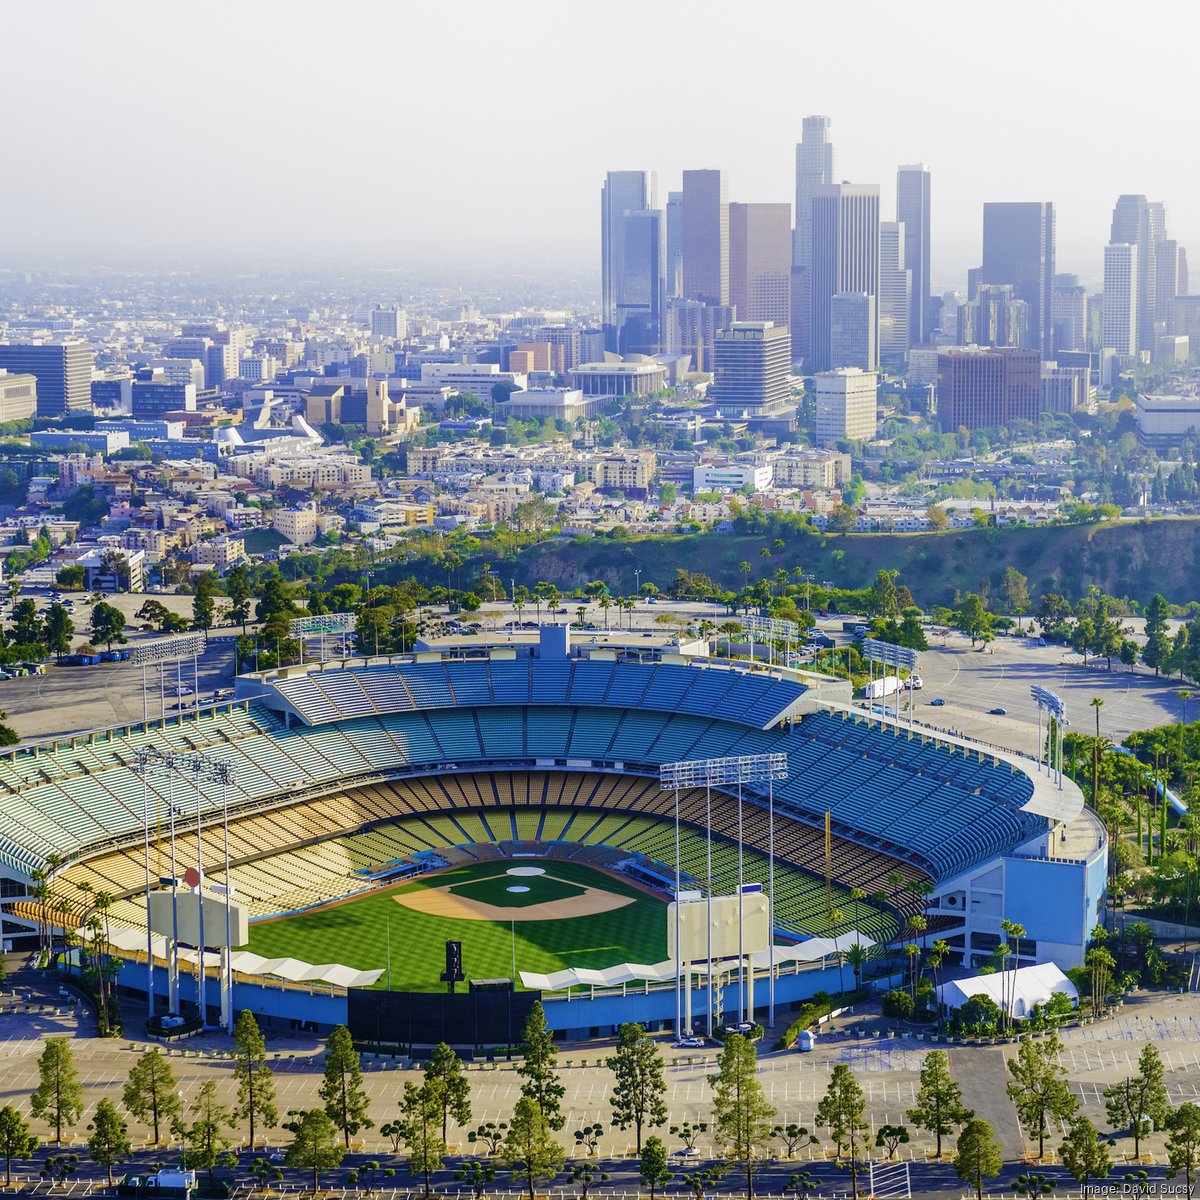 Los Angeles Dodgers on X: Join us on May 10 at Dodger Stadium as